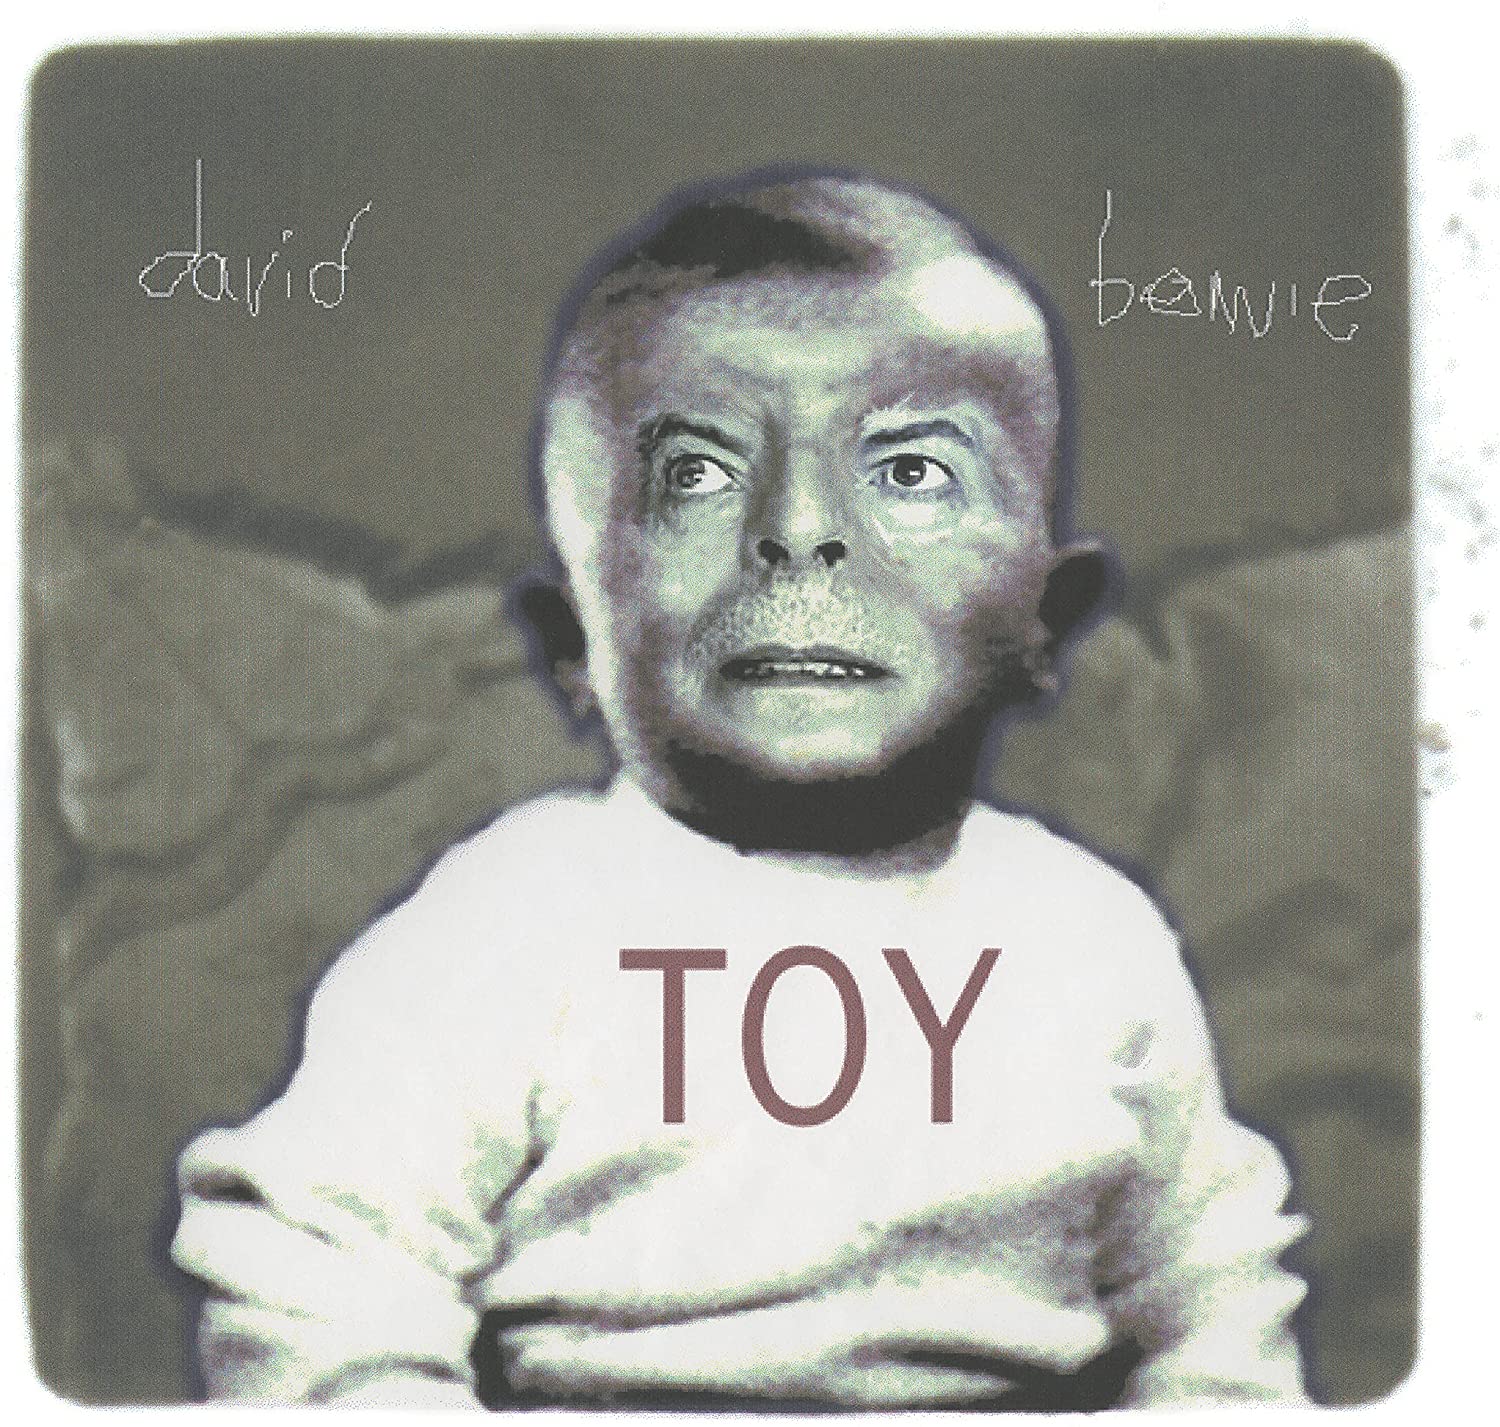 Toy by David Bowie